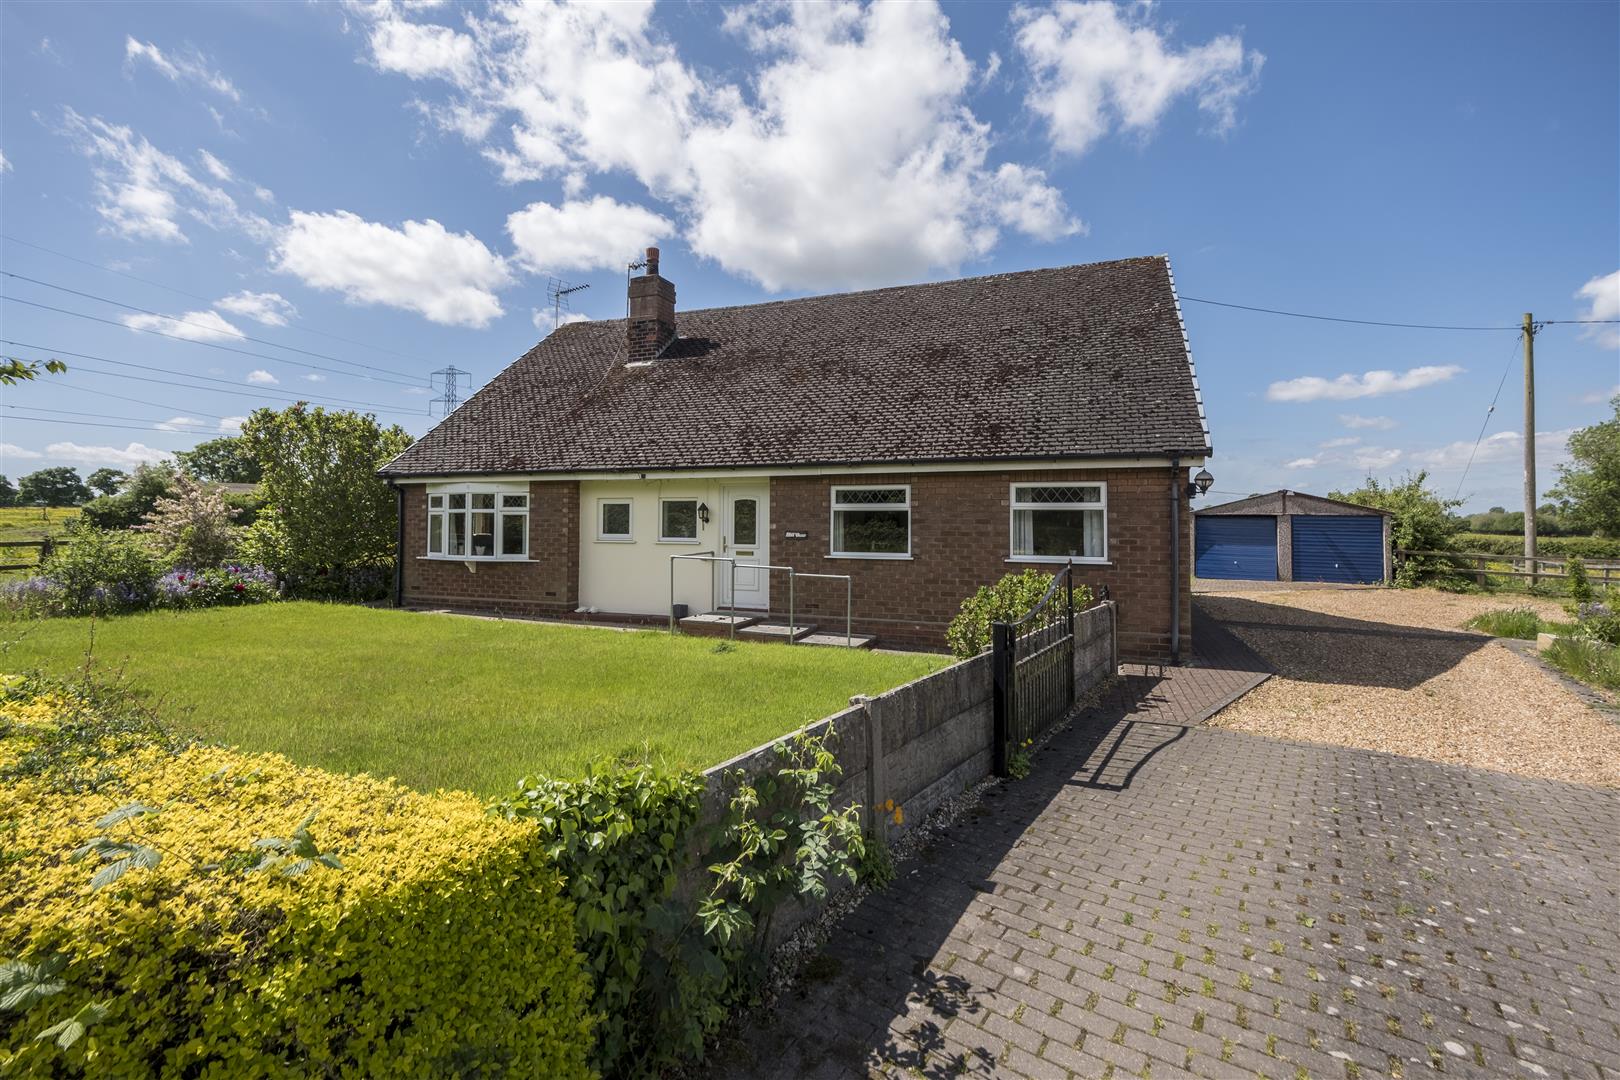 3 bedroom  Bungalow for Sale in Northwich